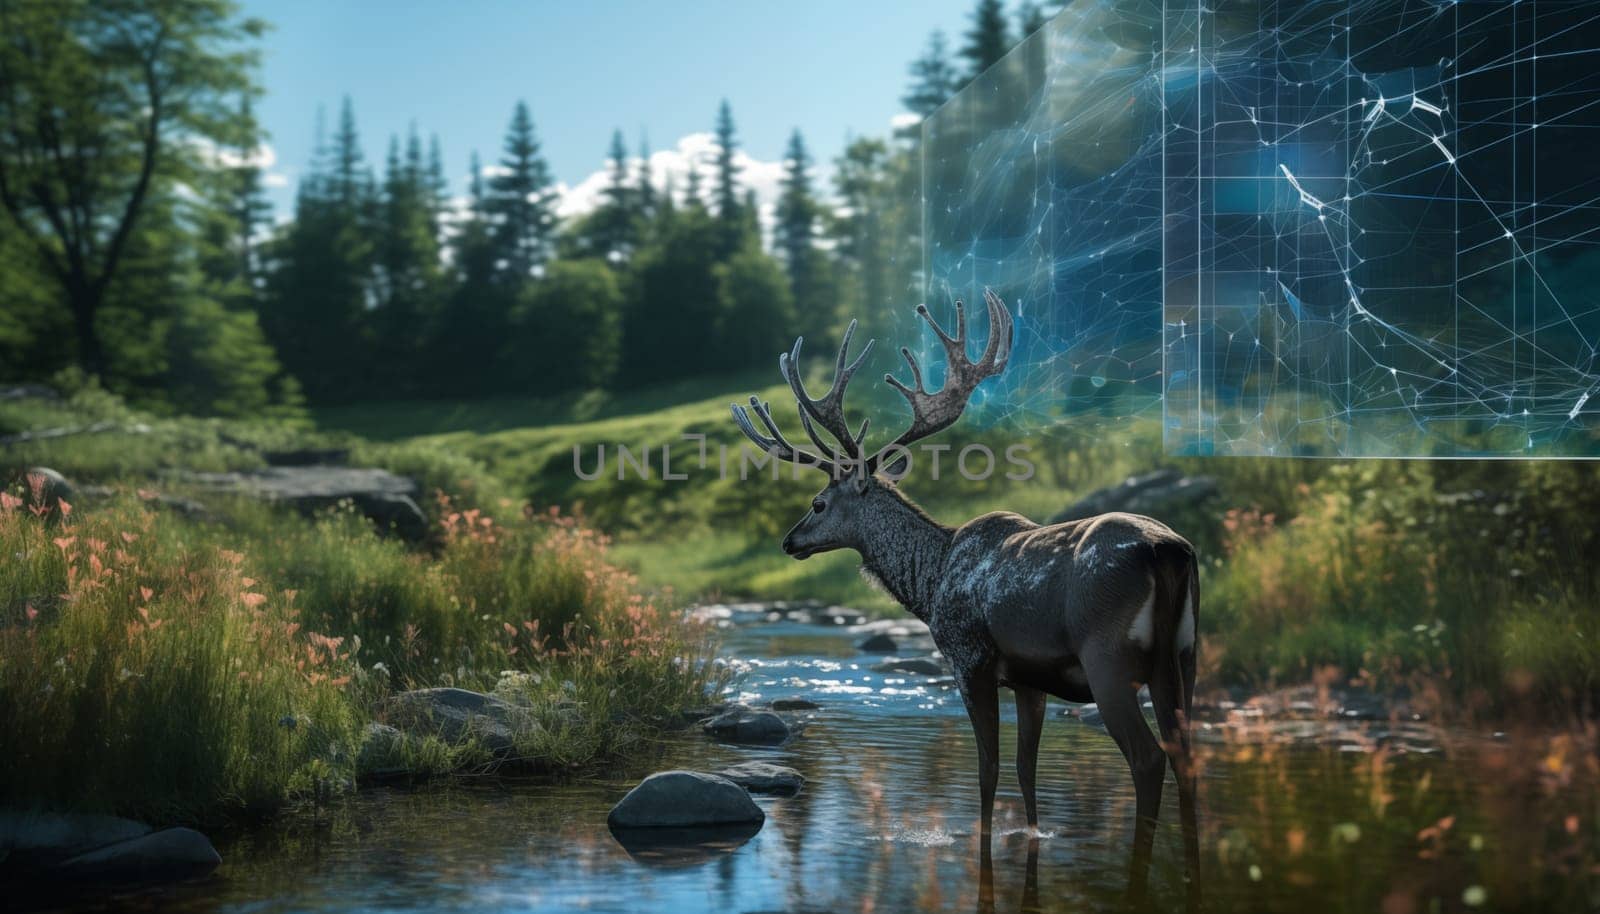 A stunning photograph captures a magnificent deer standing composedly in a flowing stream of water. The serene scene showcases the animals elegance as it navigates the tranquil environment.